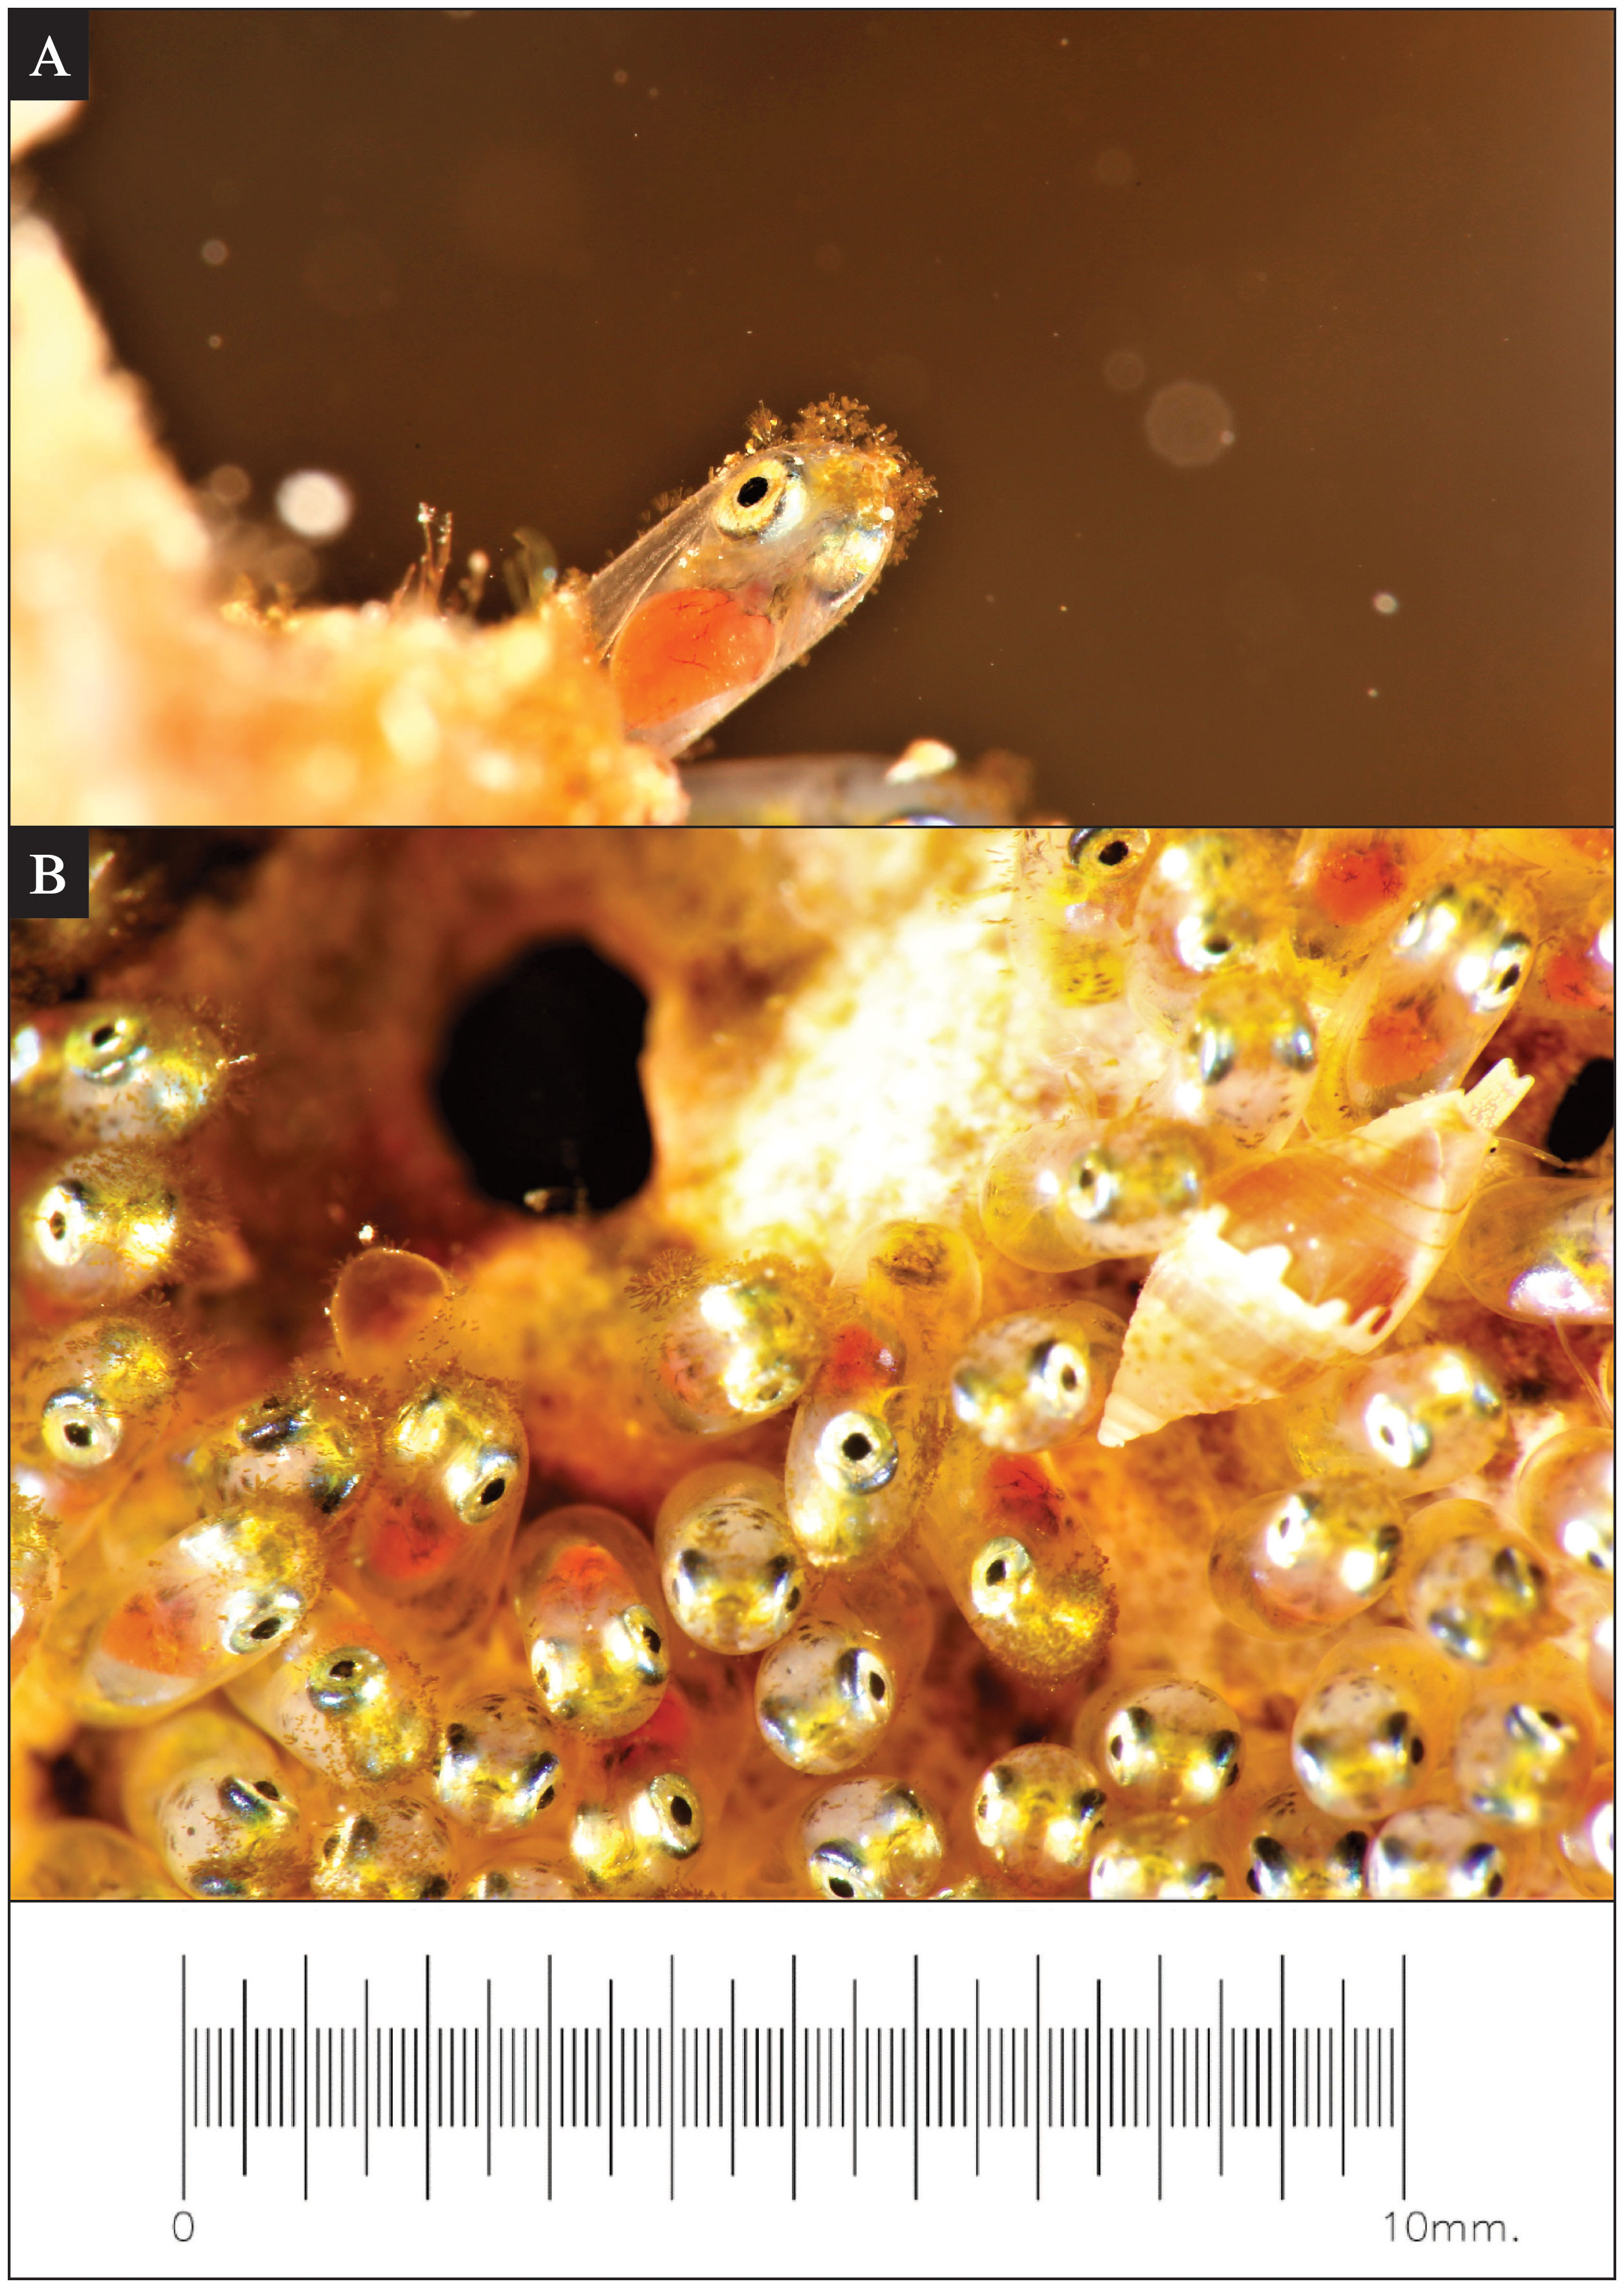 Frontiers  Egg development and hatching in two Red Sea damselfishes